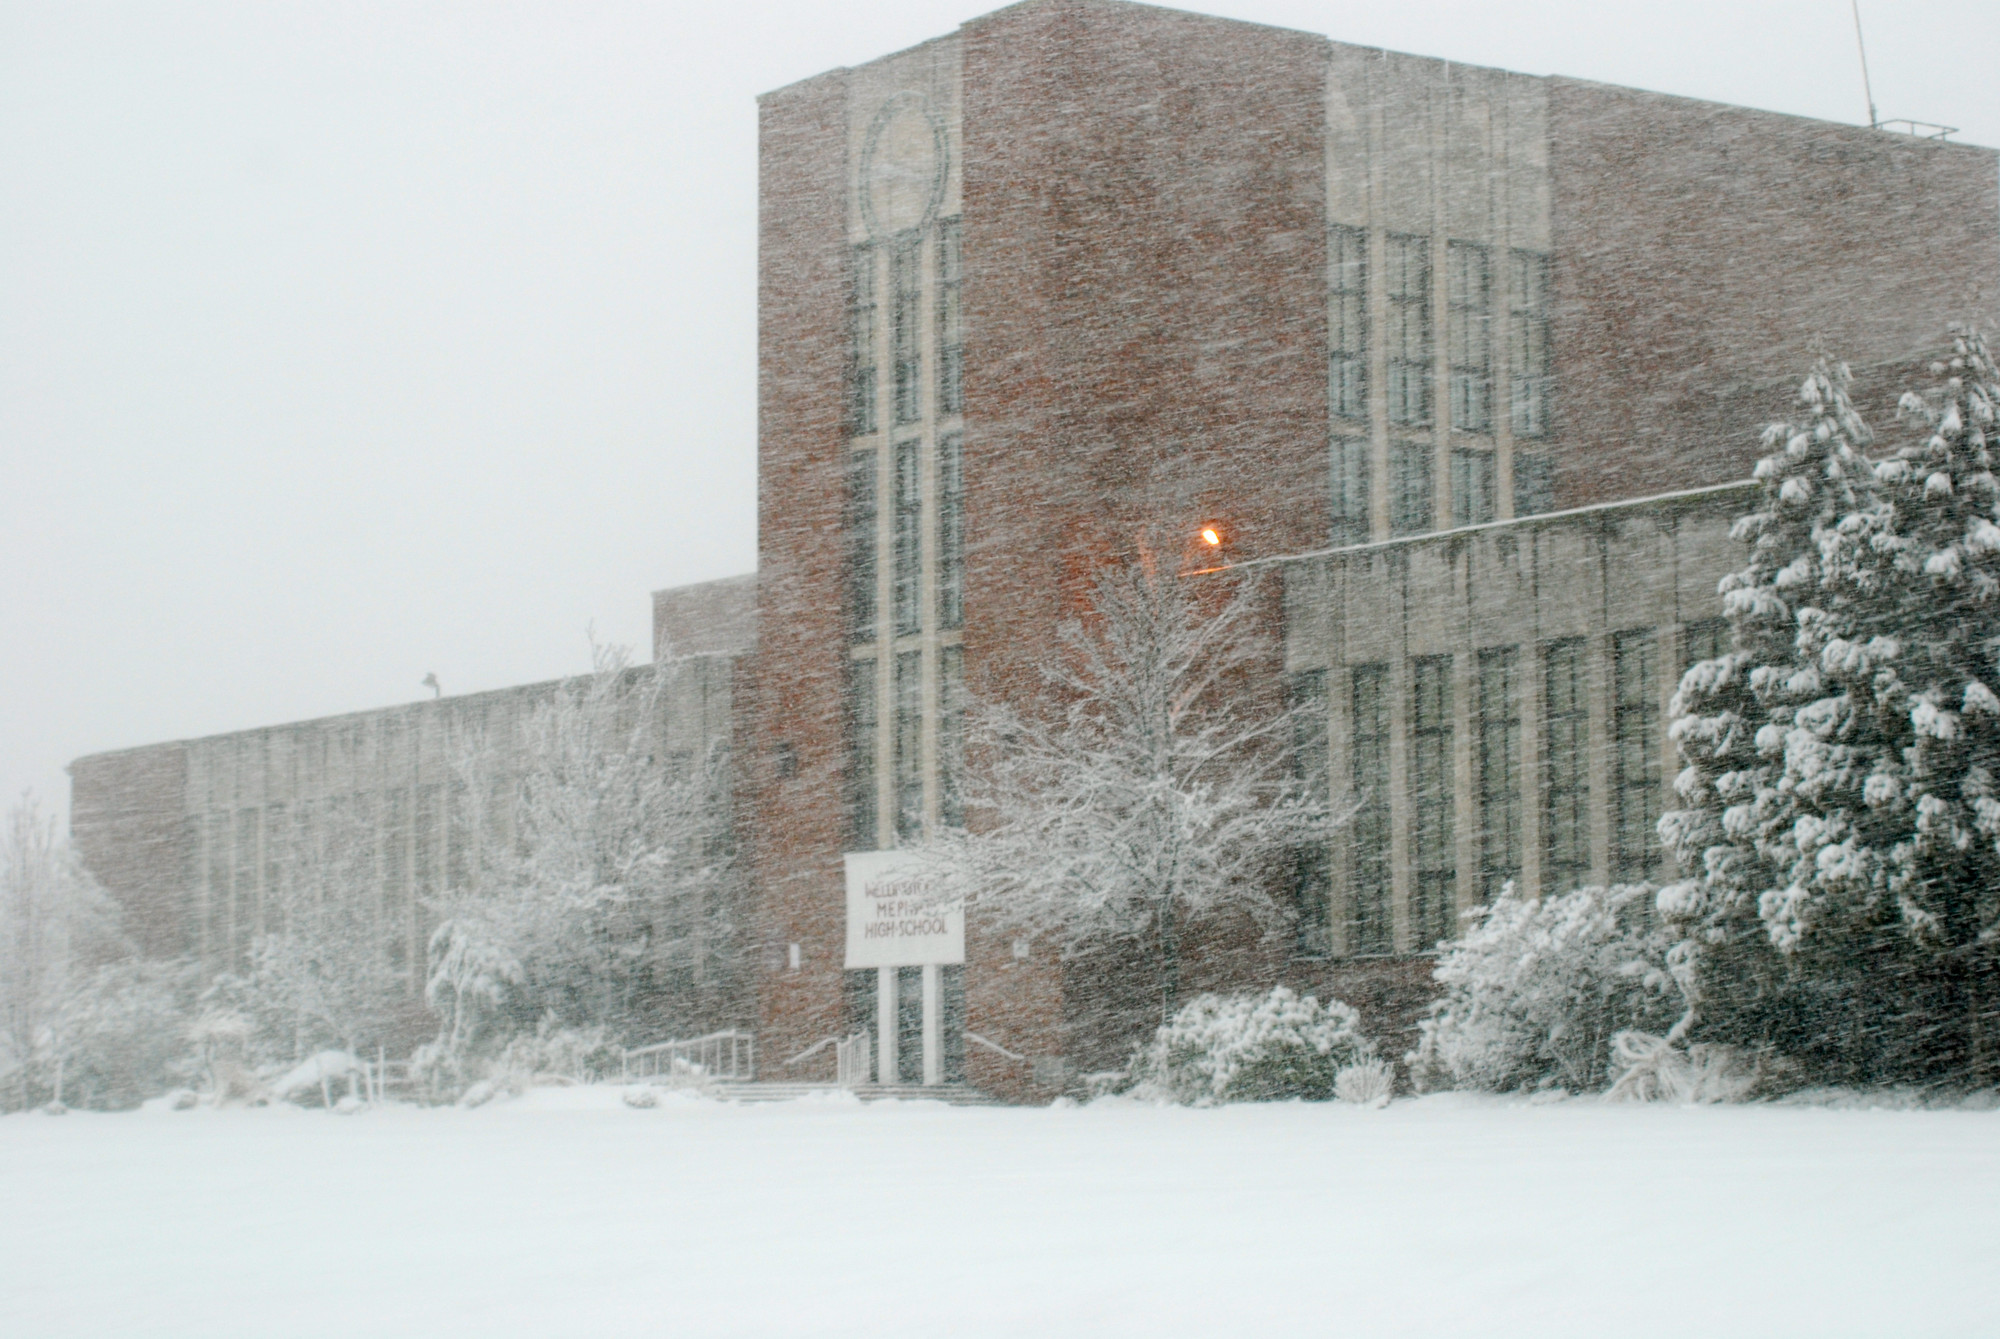 Snow covered Mepham High School in Bellmore. All schools throughout Bellmore-Merrick were closed on Friday.